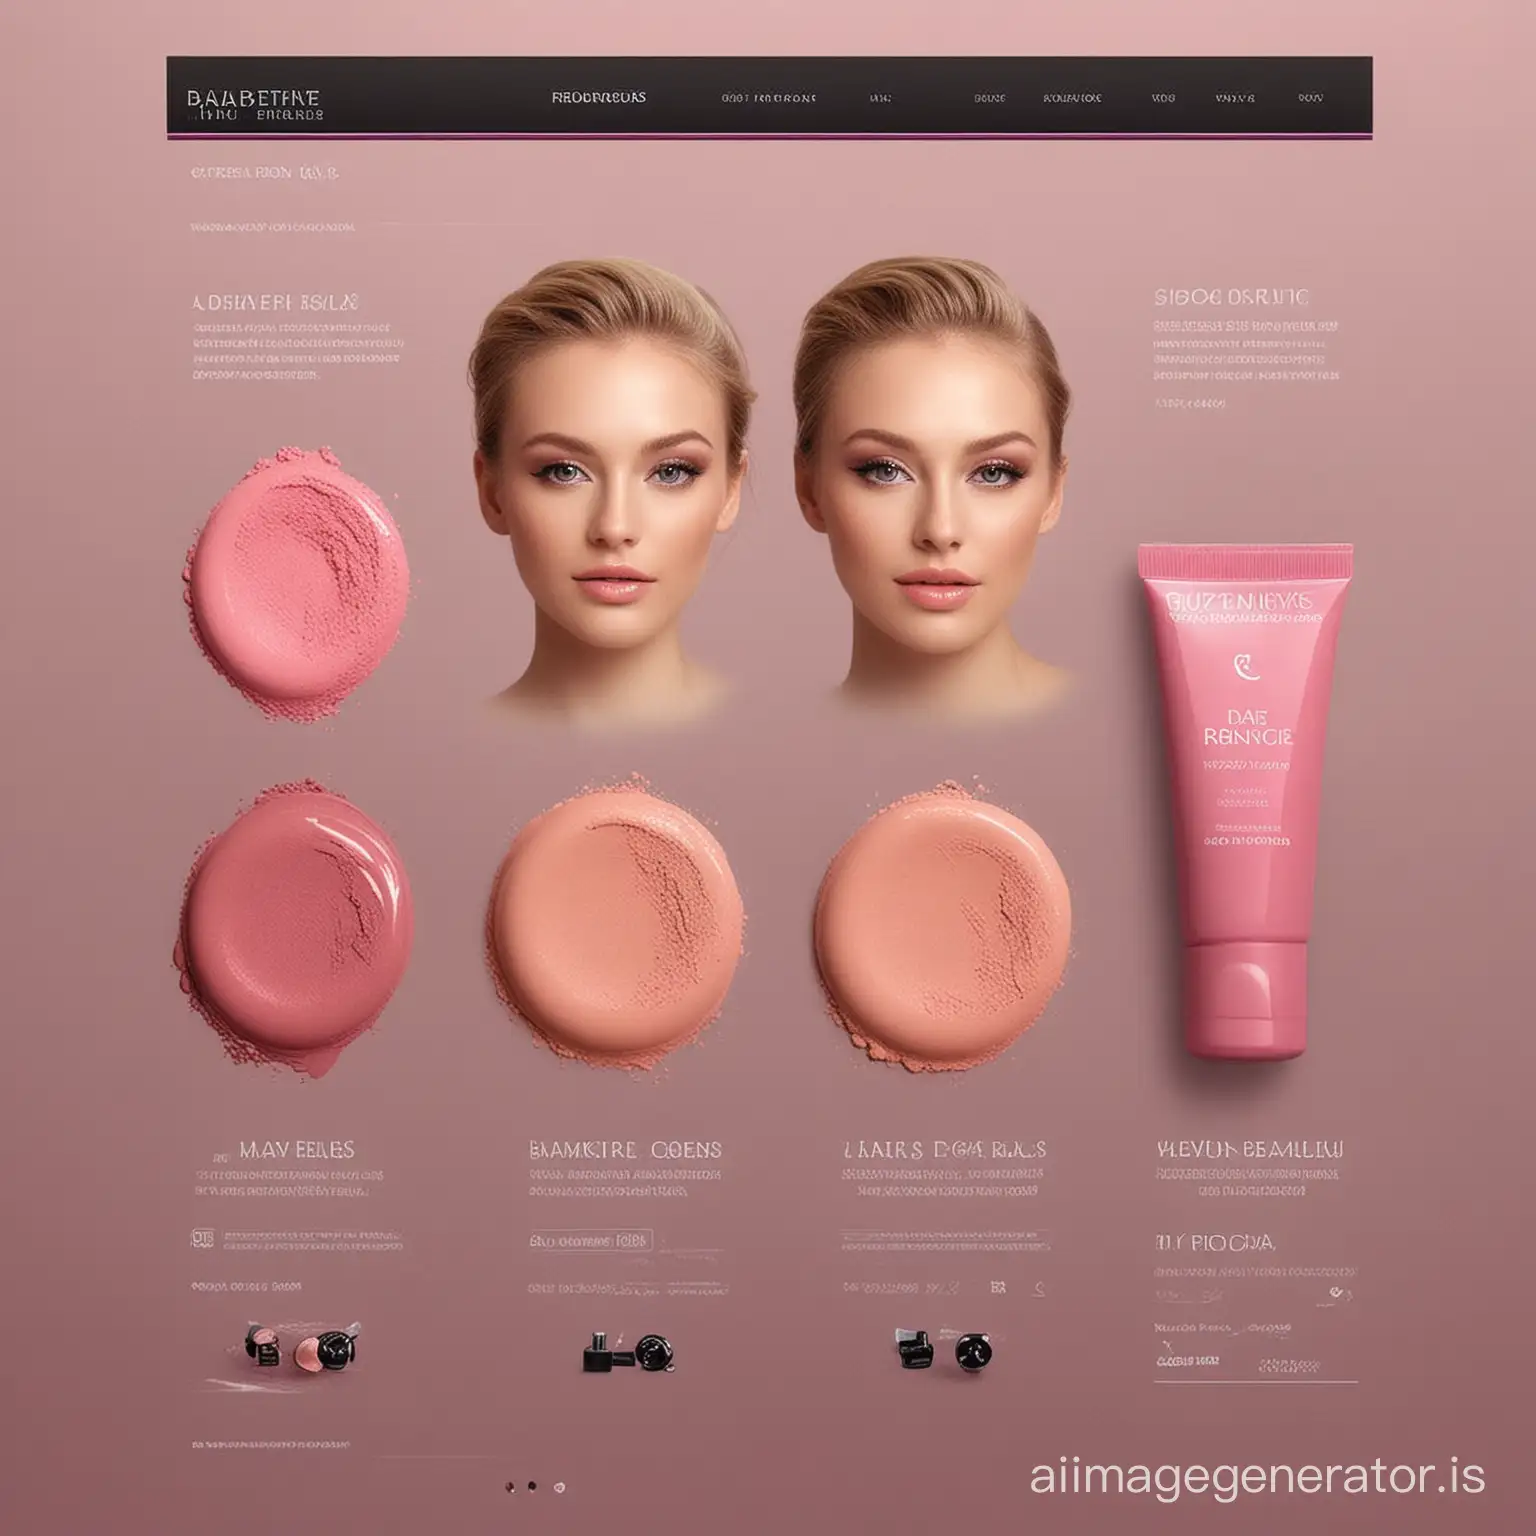 Design for web product details website makeup site
All product details appear with colors and images